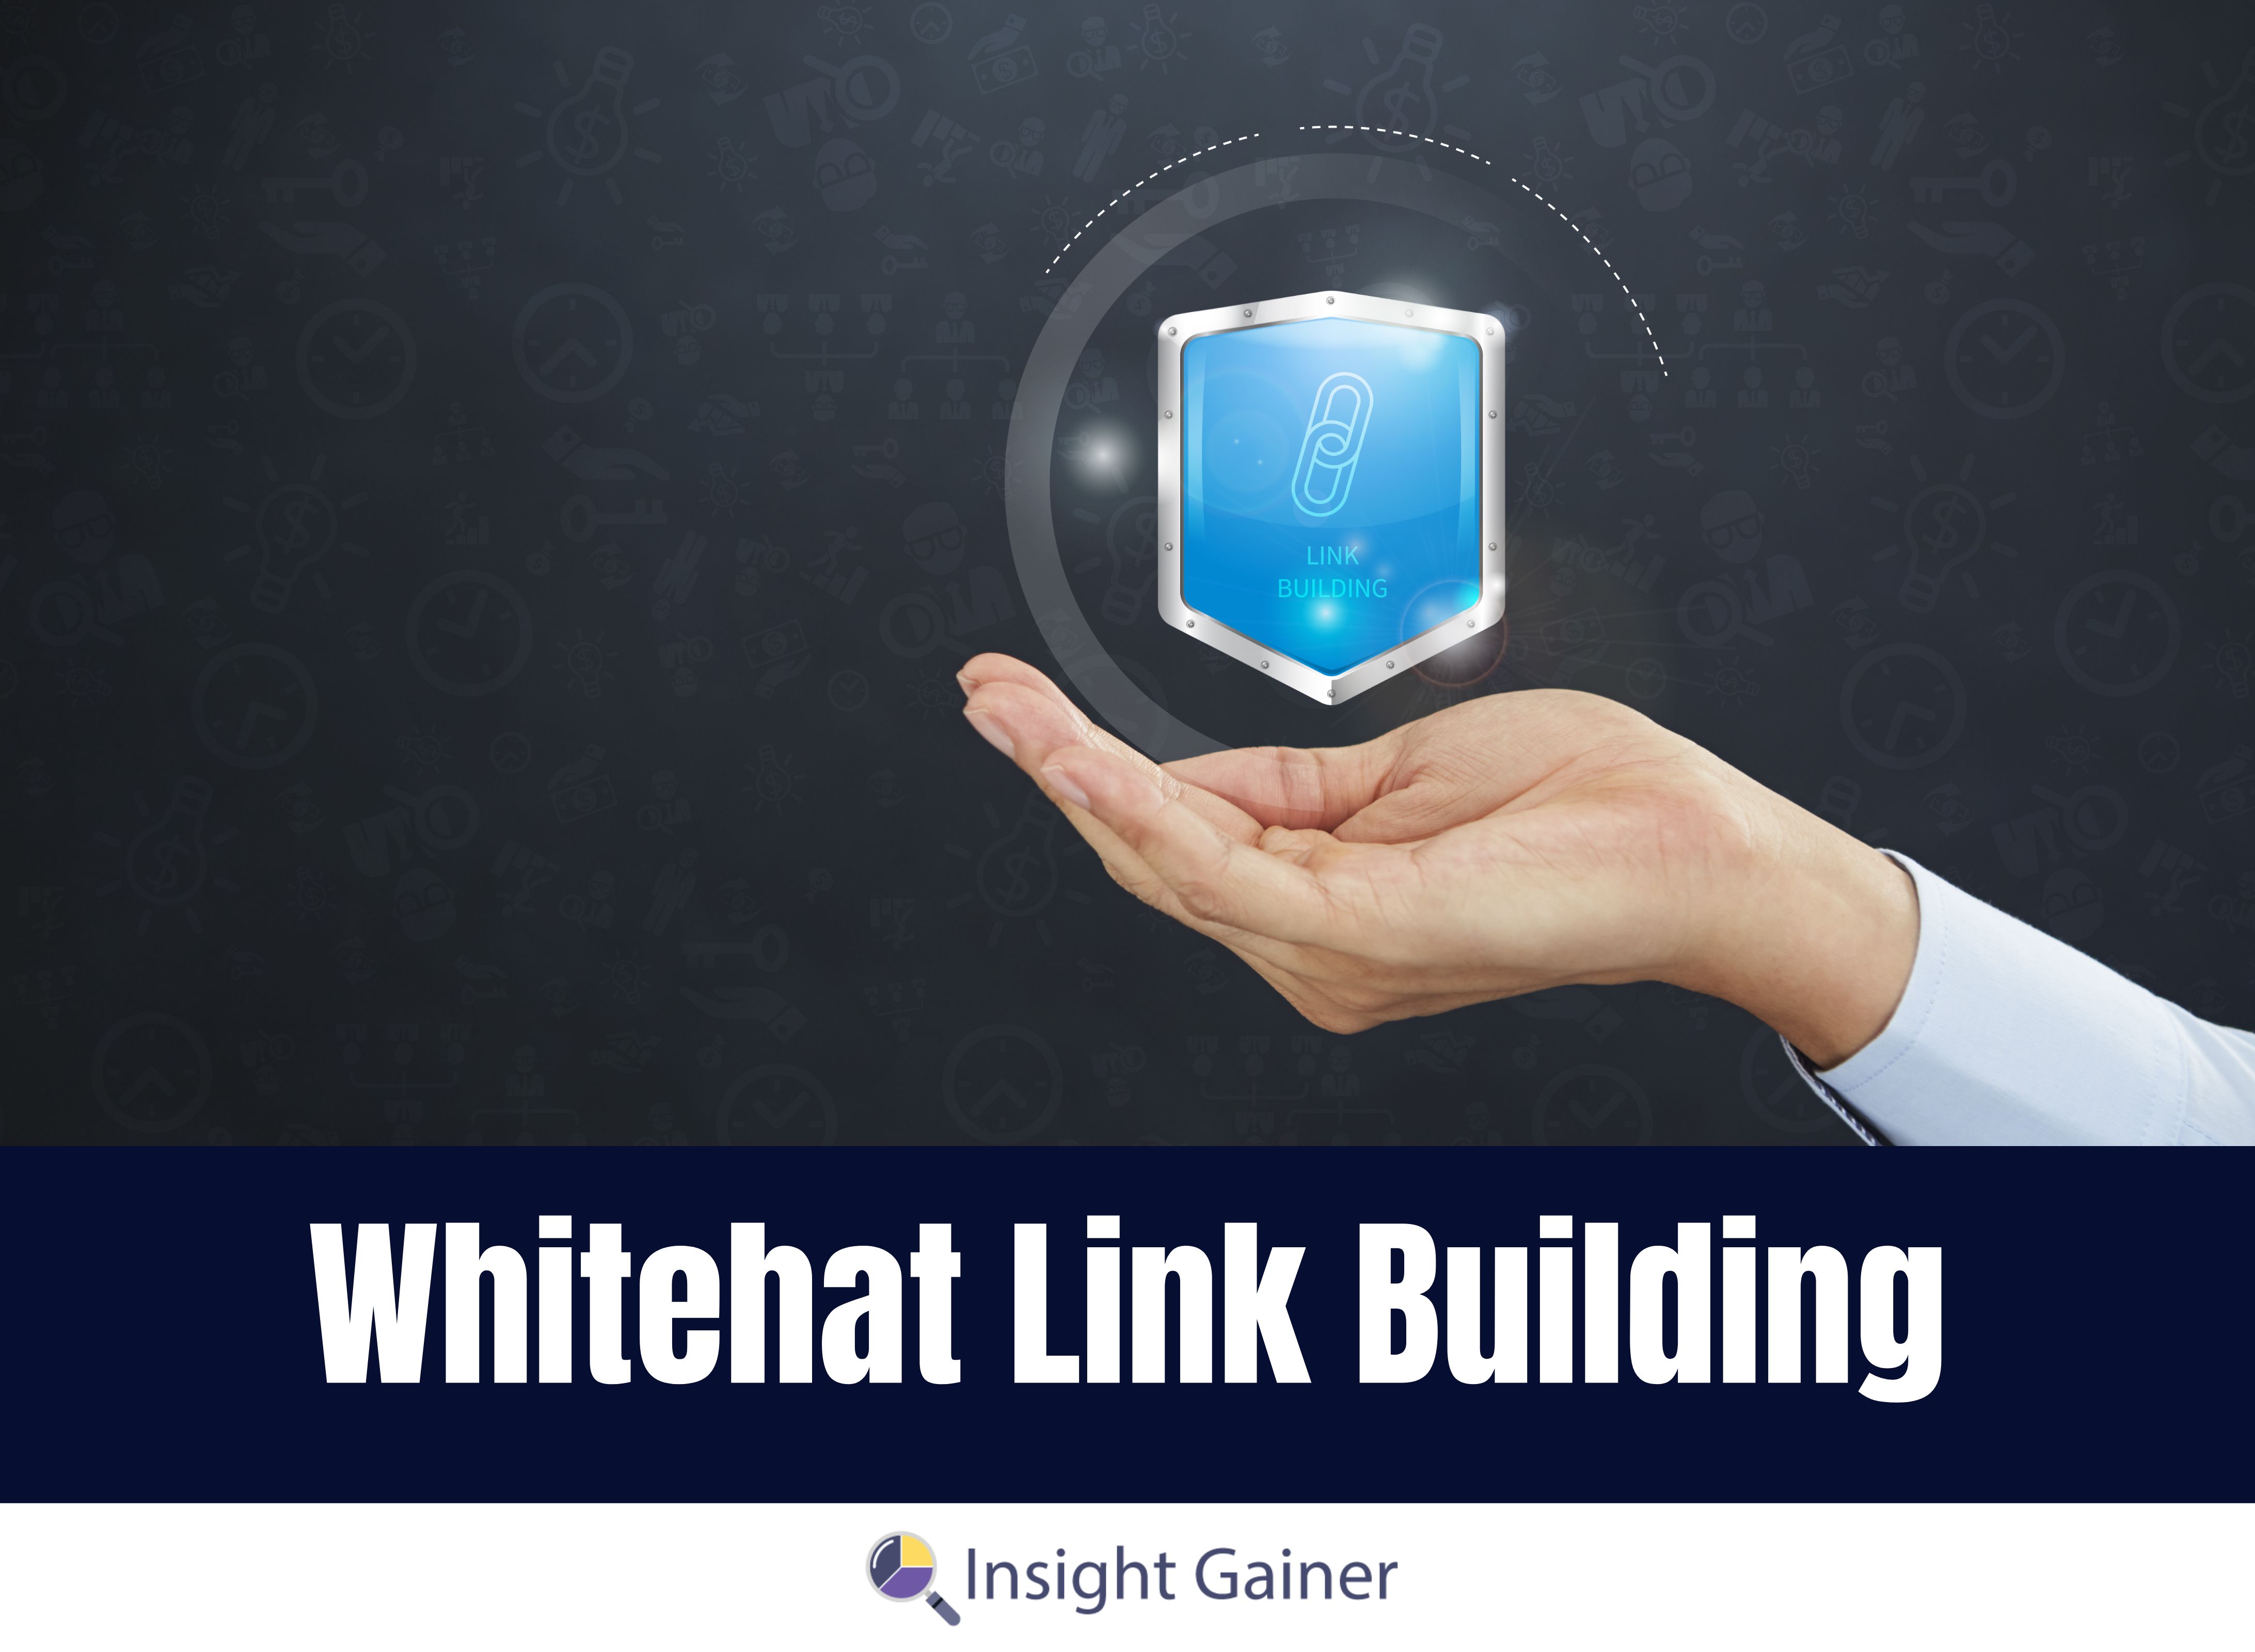 Whitehat link building, Insight Gainer